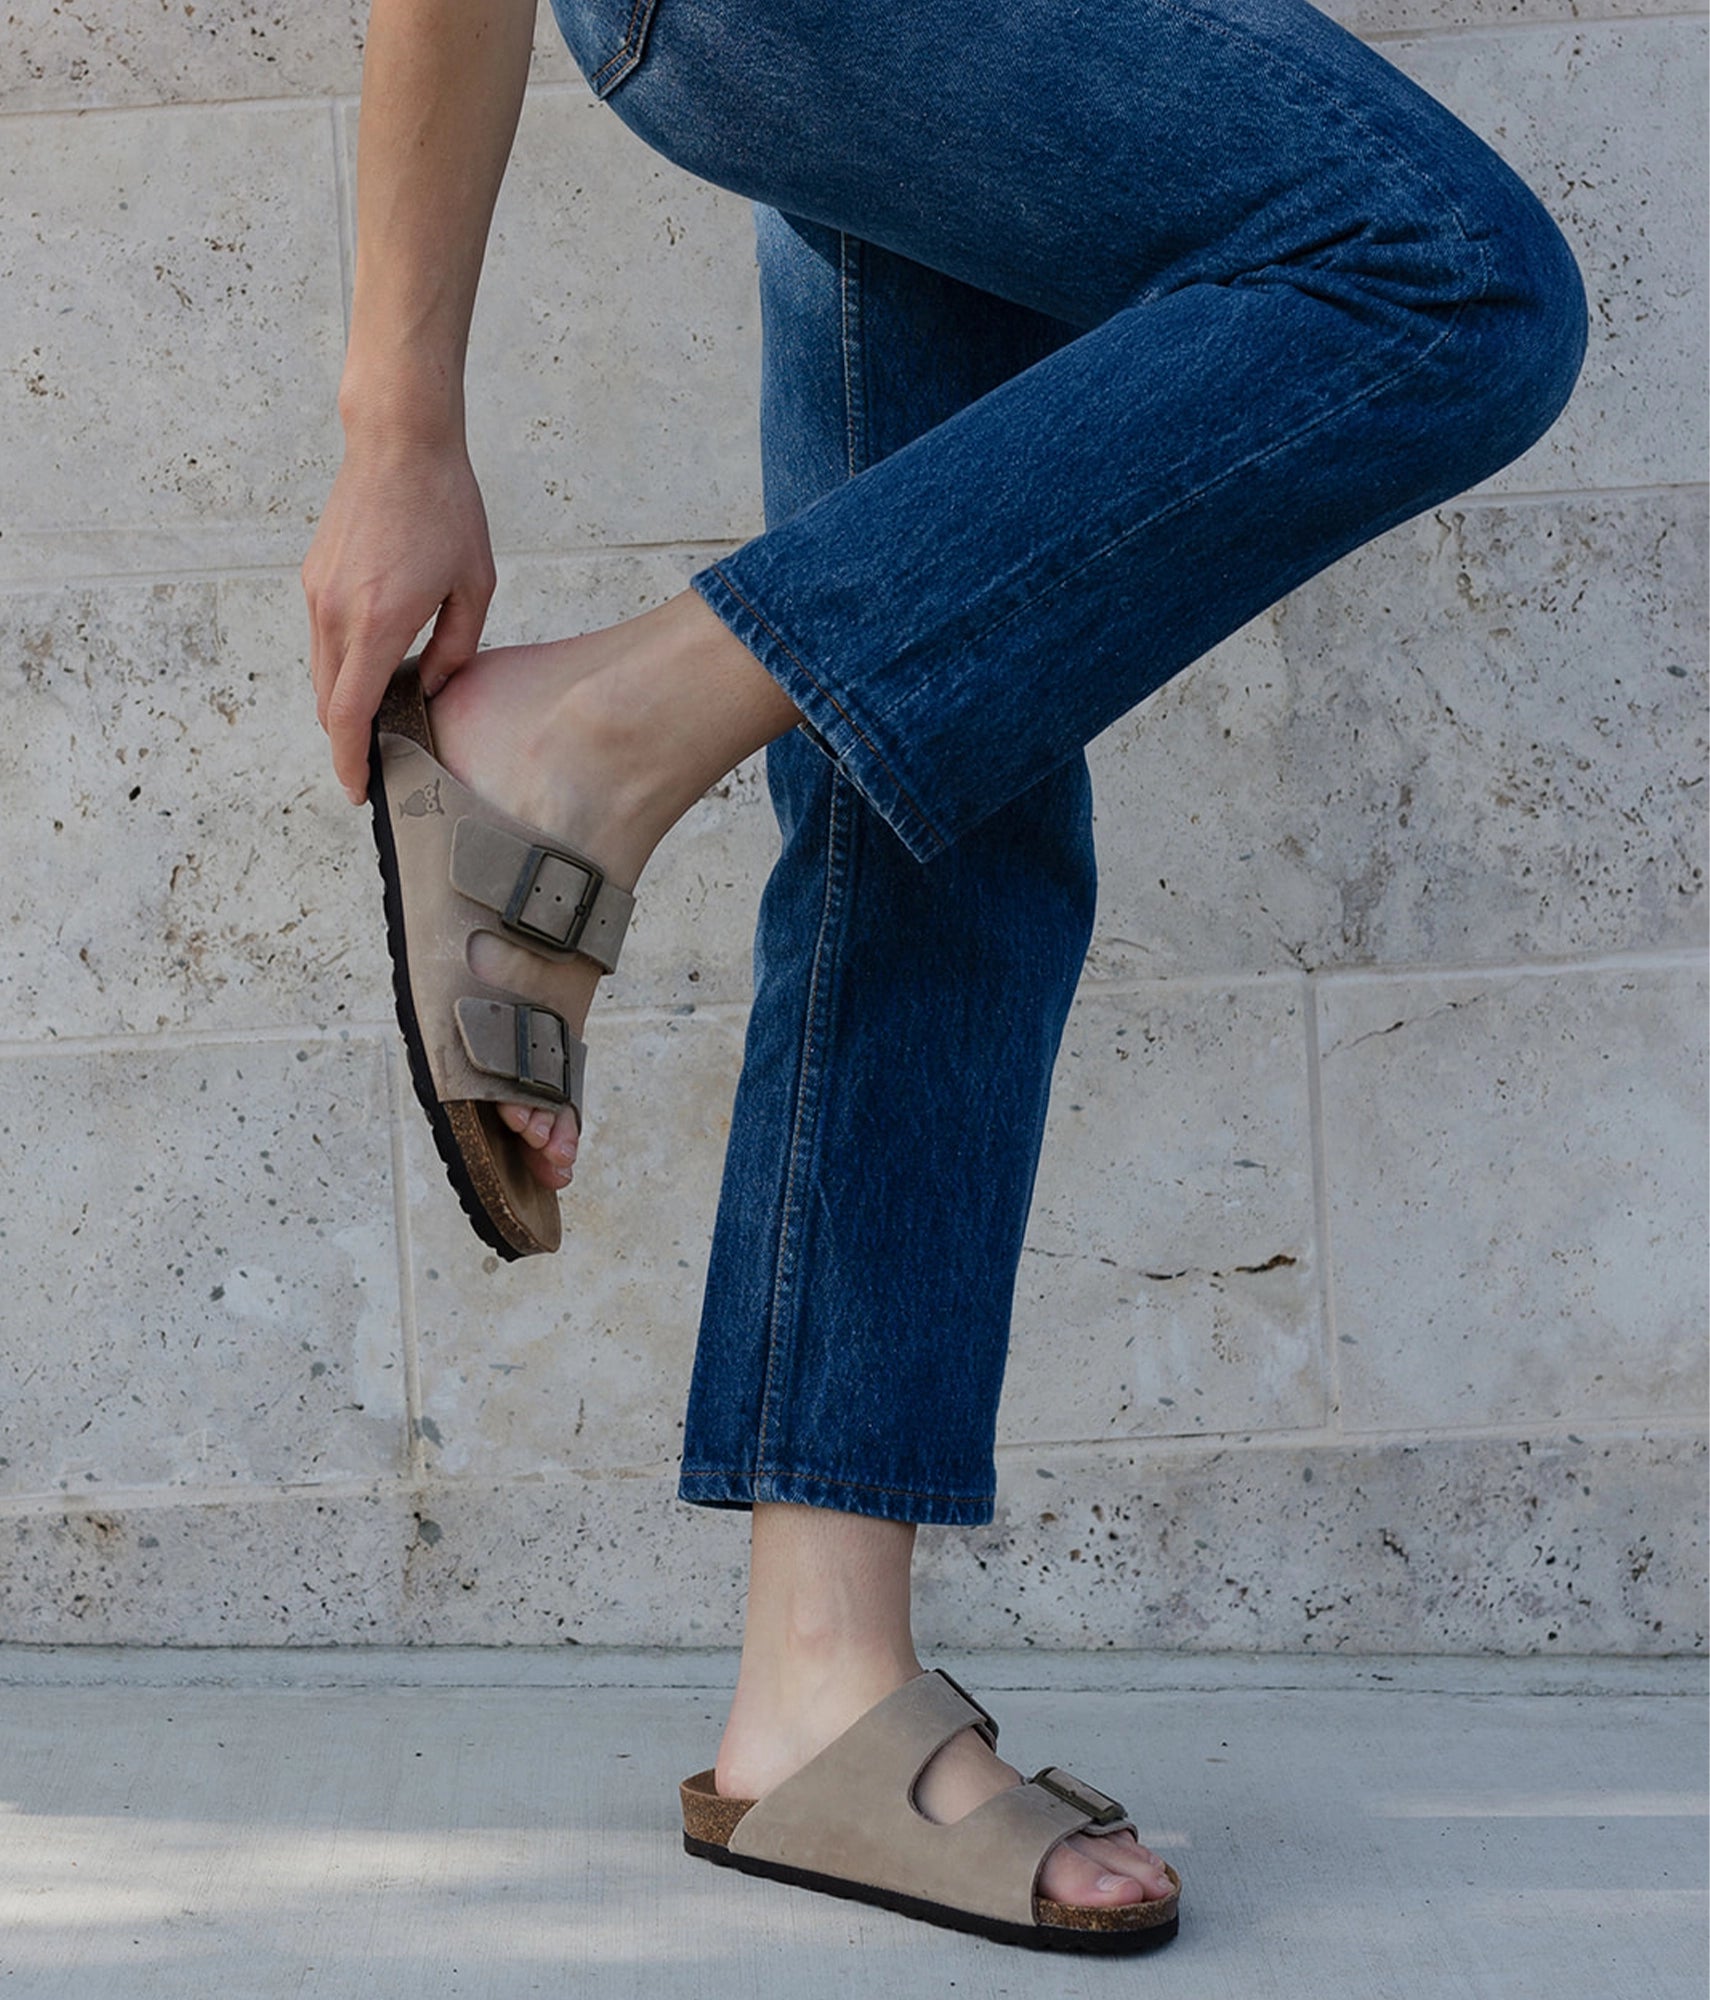 woman wearing dark blue jeans along with a pair of classic cork sandals in beige nubuck leather with a brown EVA sole, suede footbed and brass gold buckle